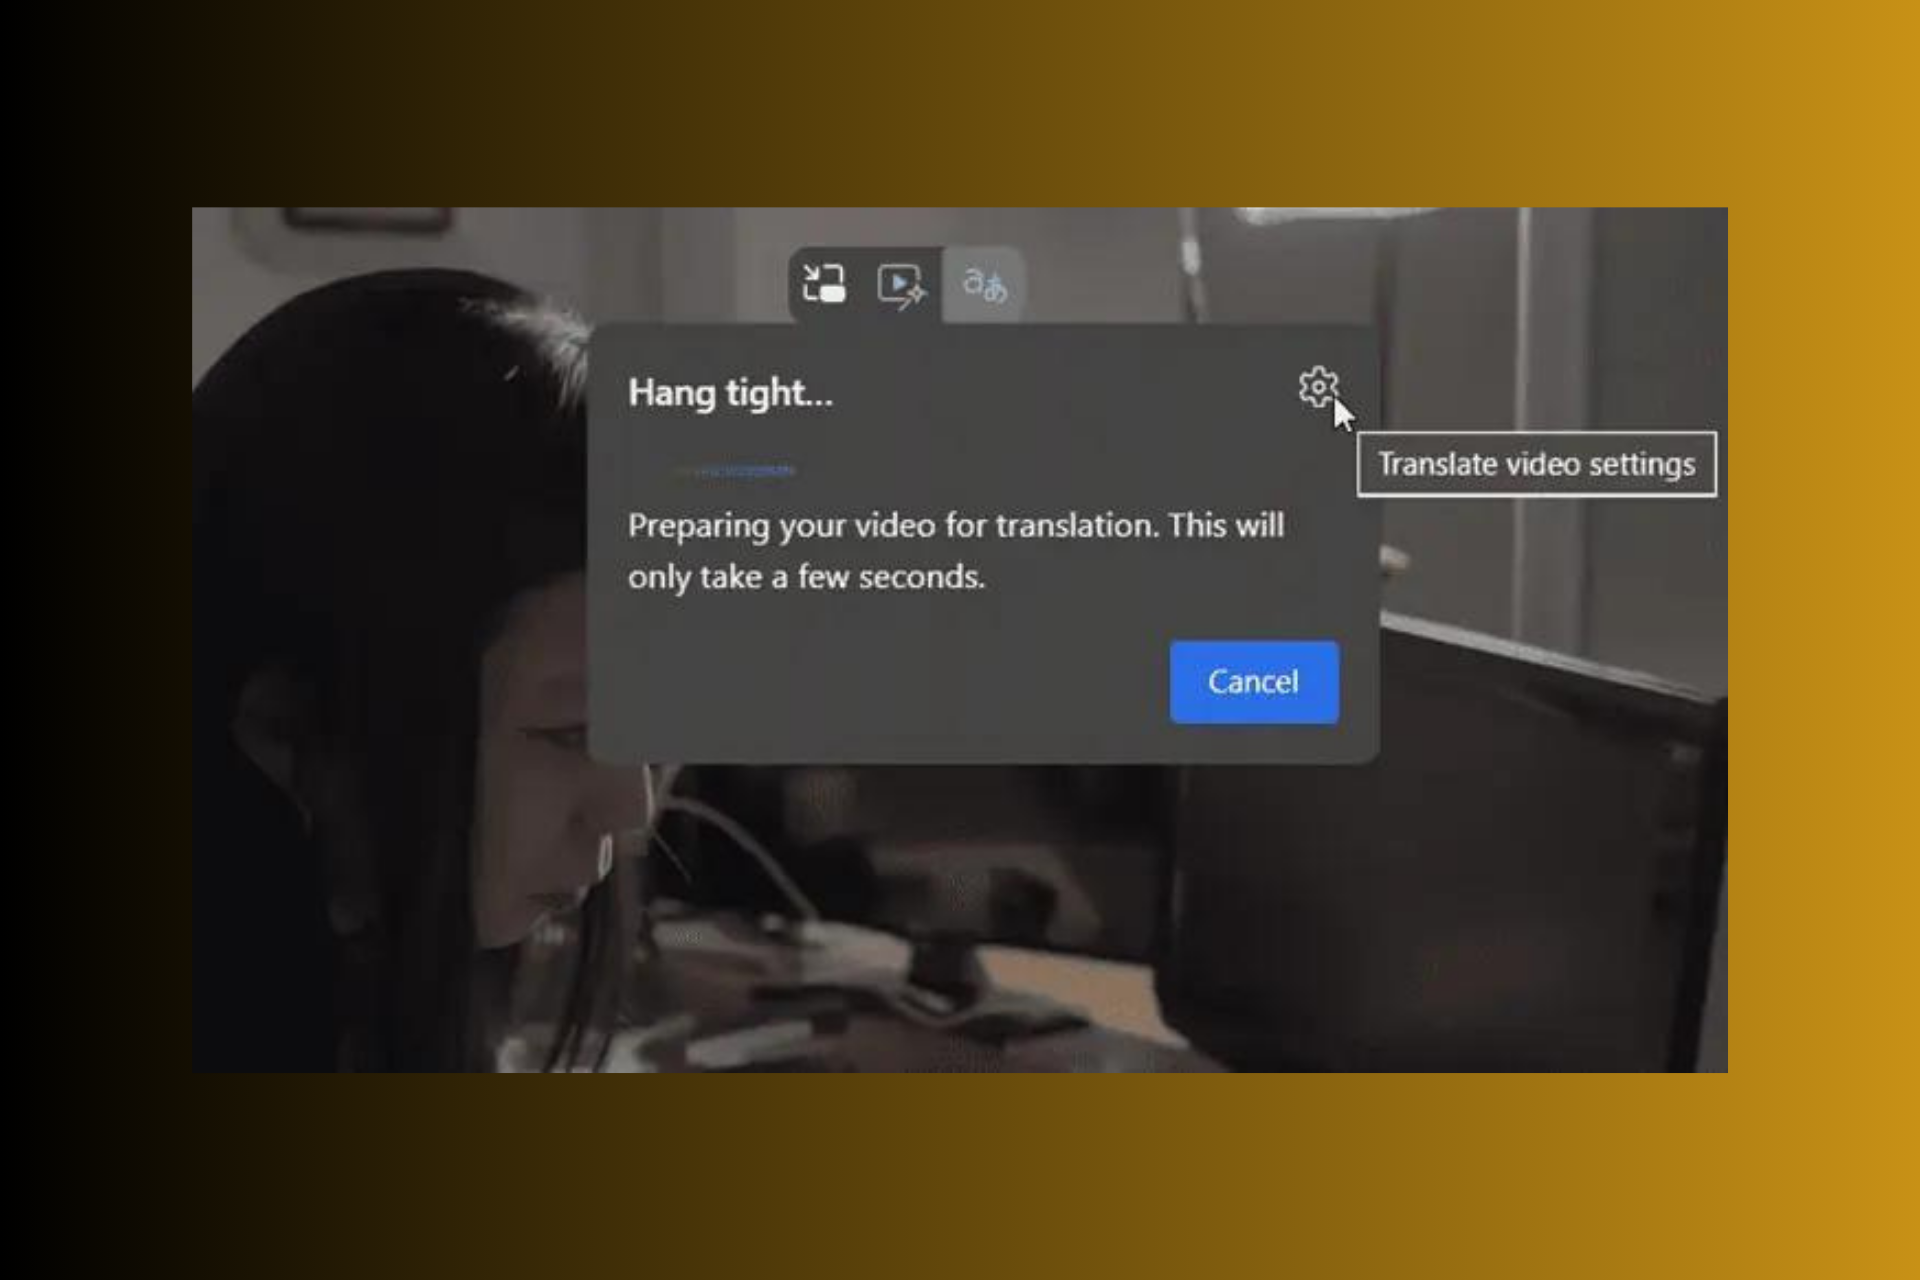 Microsoft Edge Canary: You will soon get a toggle to enable/disable the video translation feature